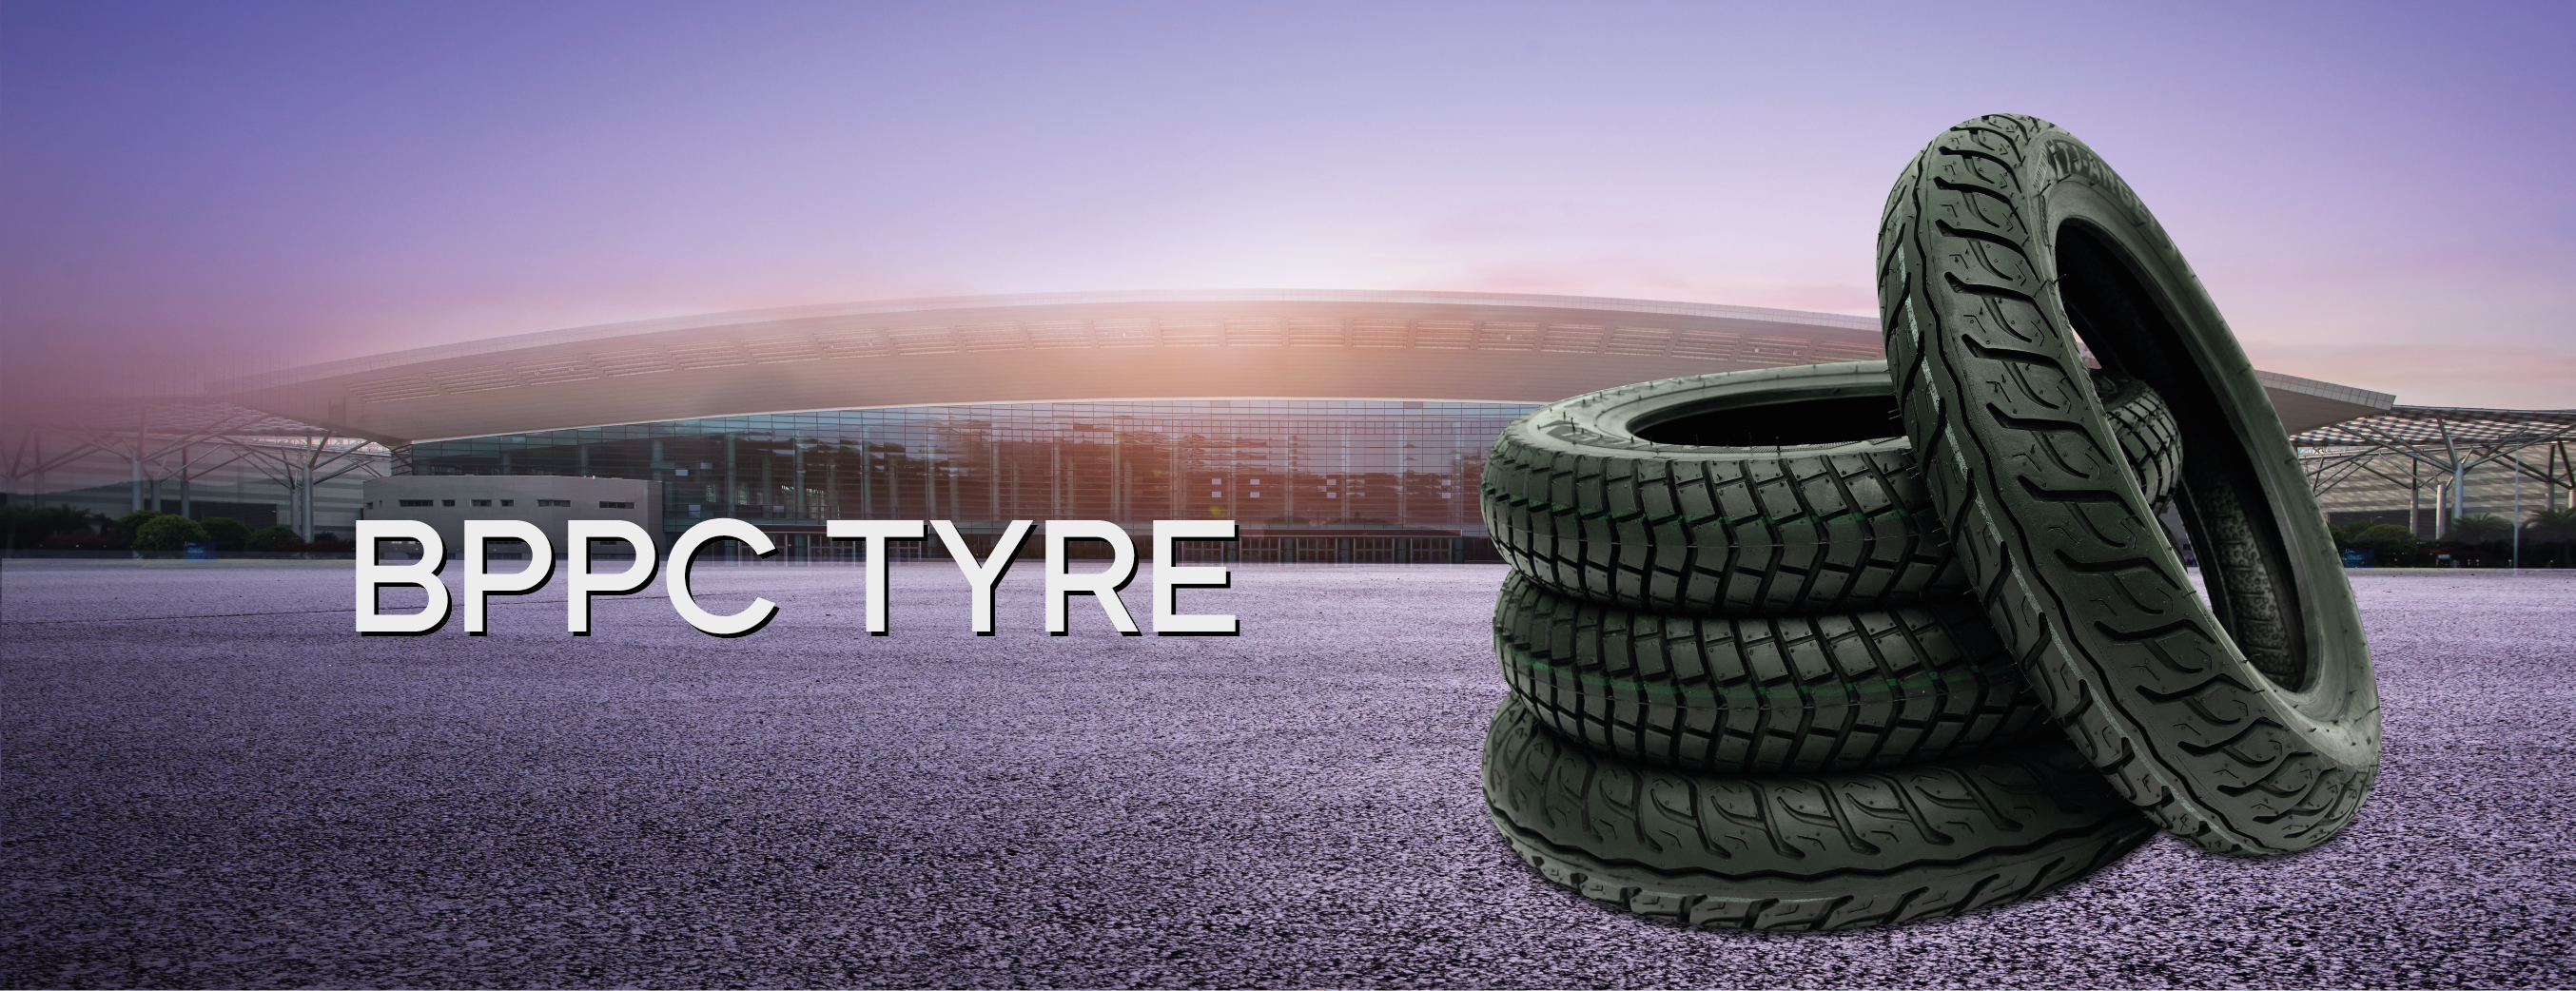 Best Tyre Company in India 